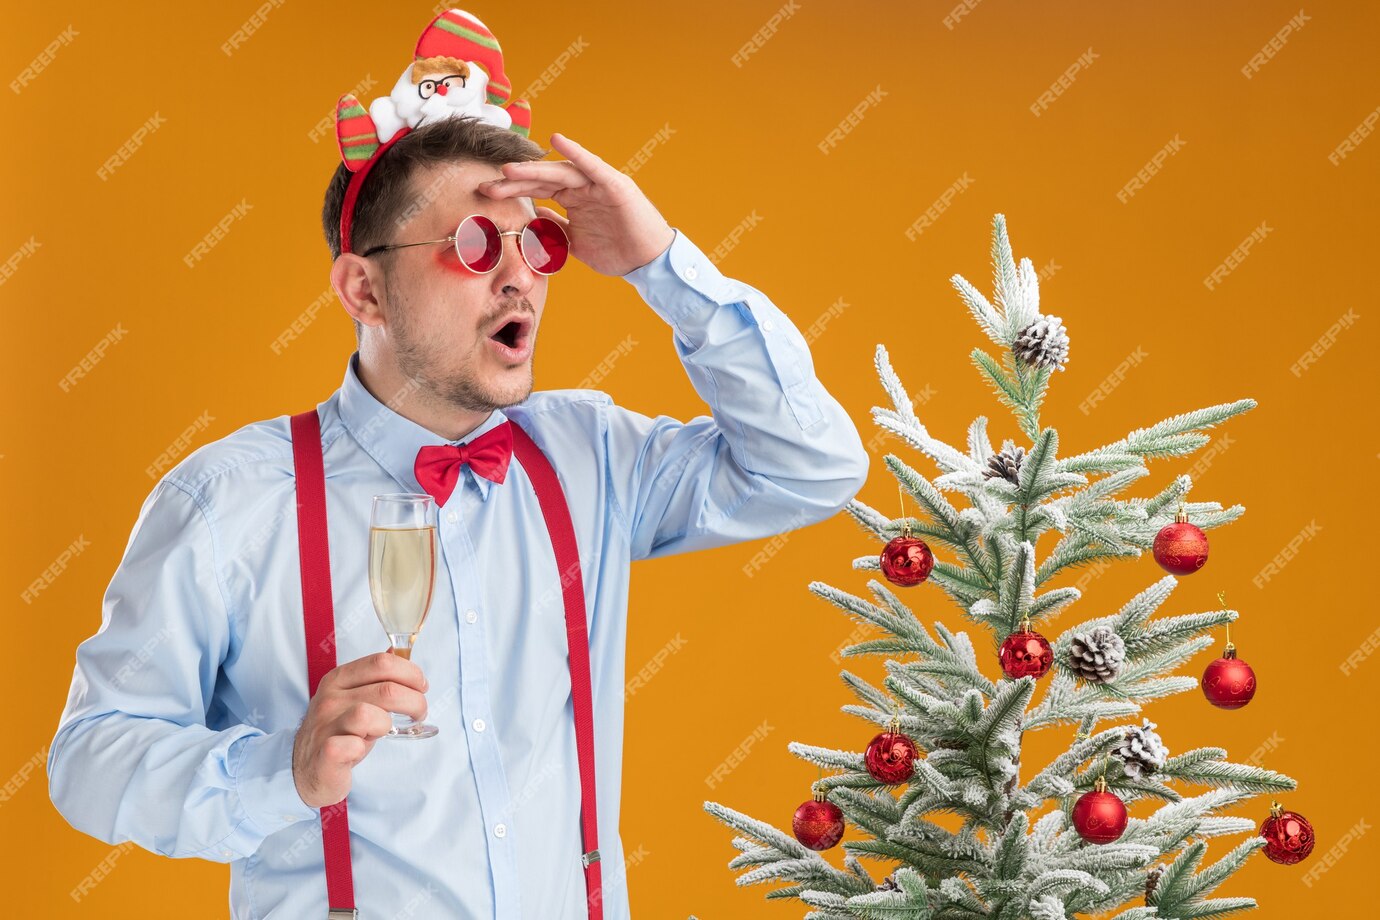 Is Your Christmas Tree Causing Meltdowns? Healthy Solutions to Keep the Holidays Happy